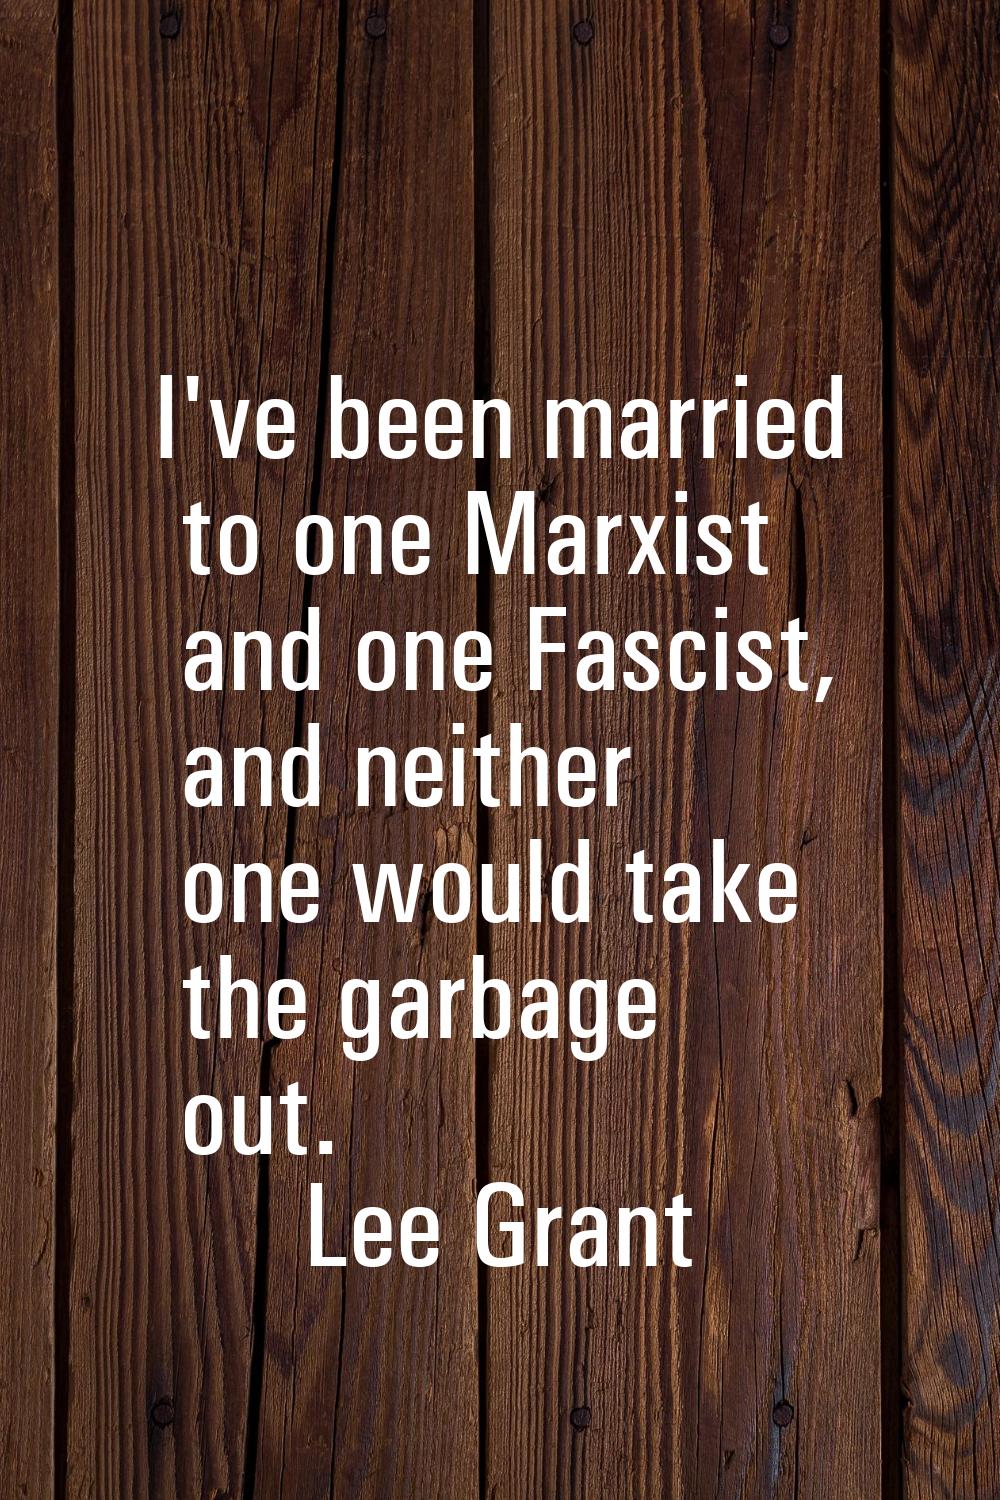 I've been married to one Marxist and one Fascist, and neither one would take the garbage out.